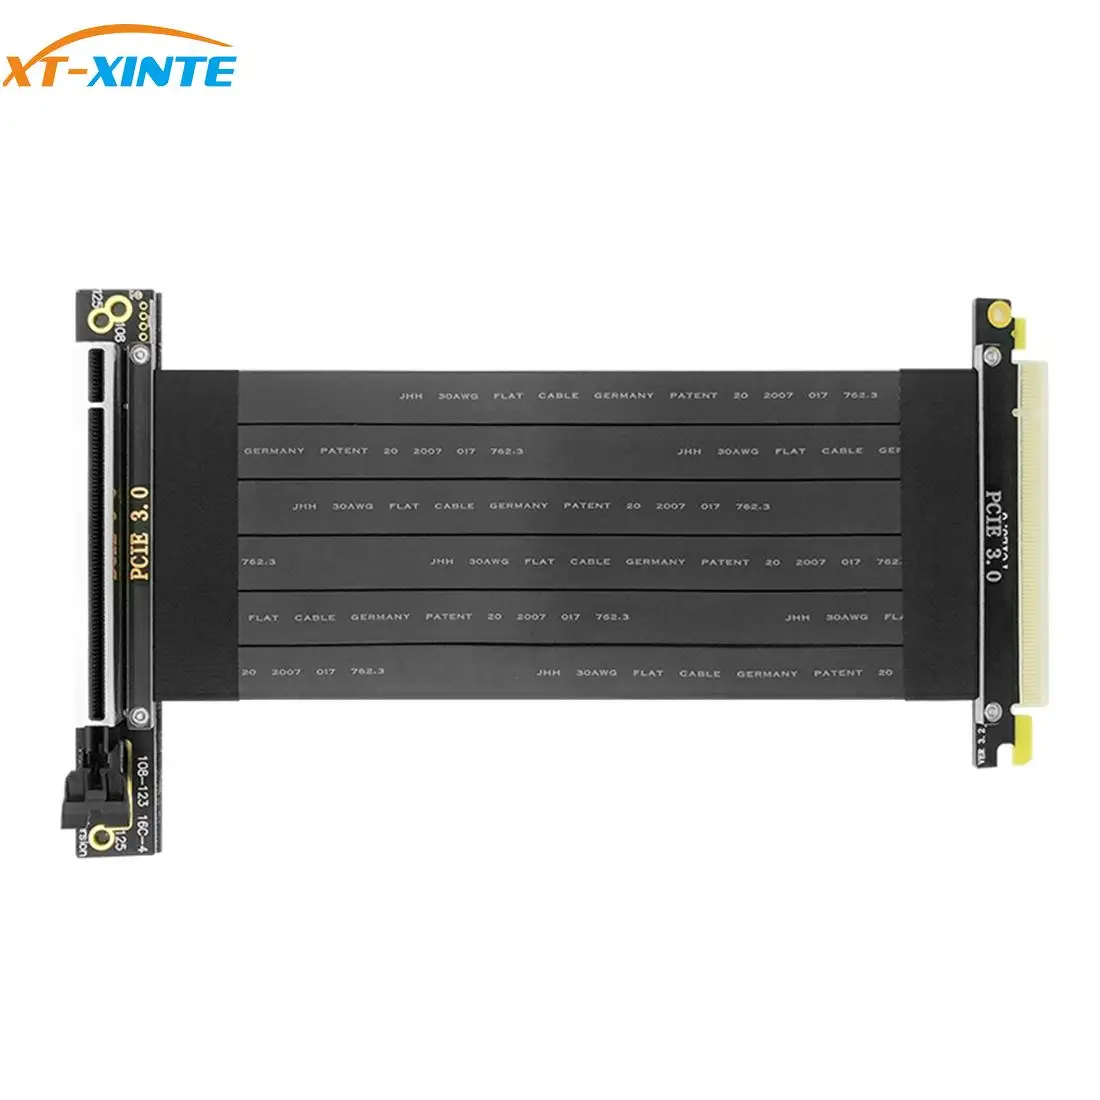 

XT-XINTE PCIe 3.0 x16 High Speed PC Graphics Cards PCI Express Extension Cable 16x GPU Riser Cable For ATX/ITX A4 NR200 Chassis